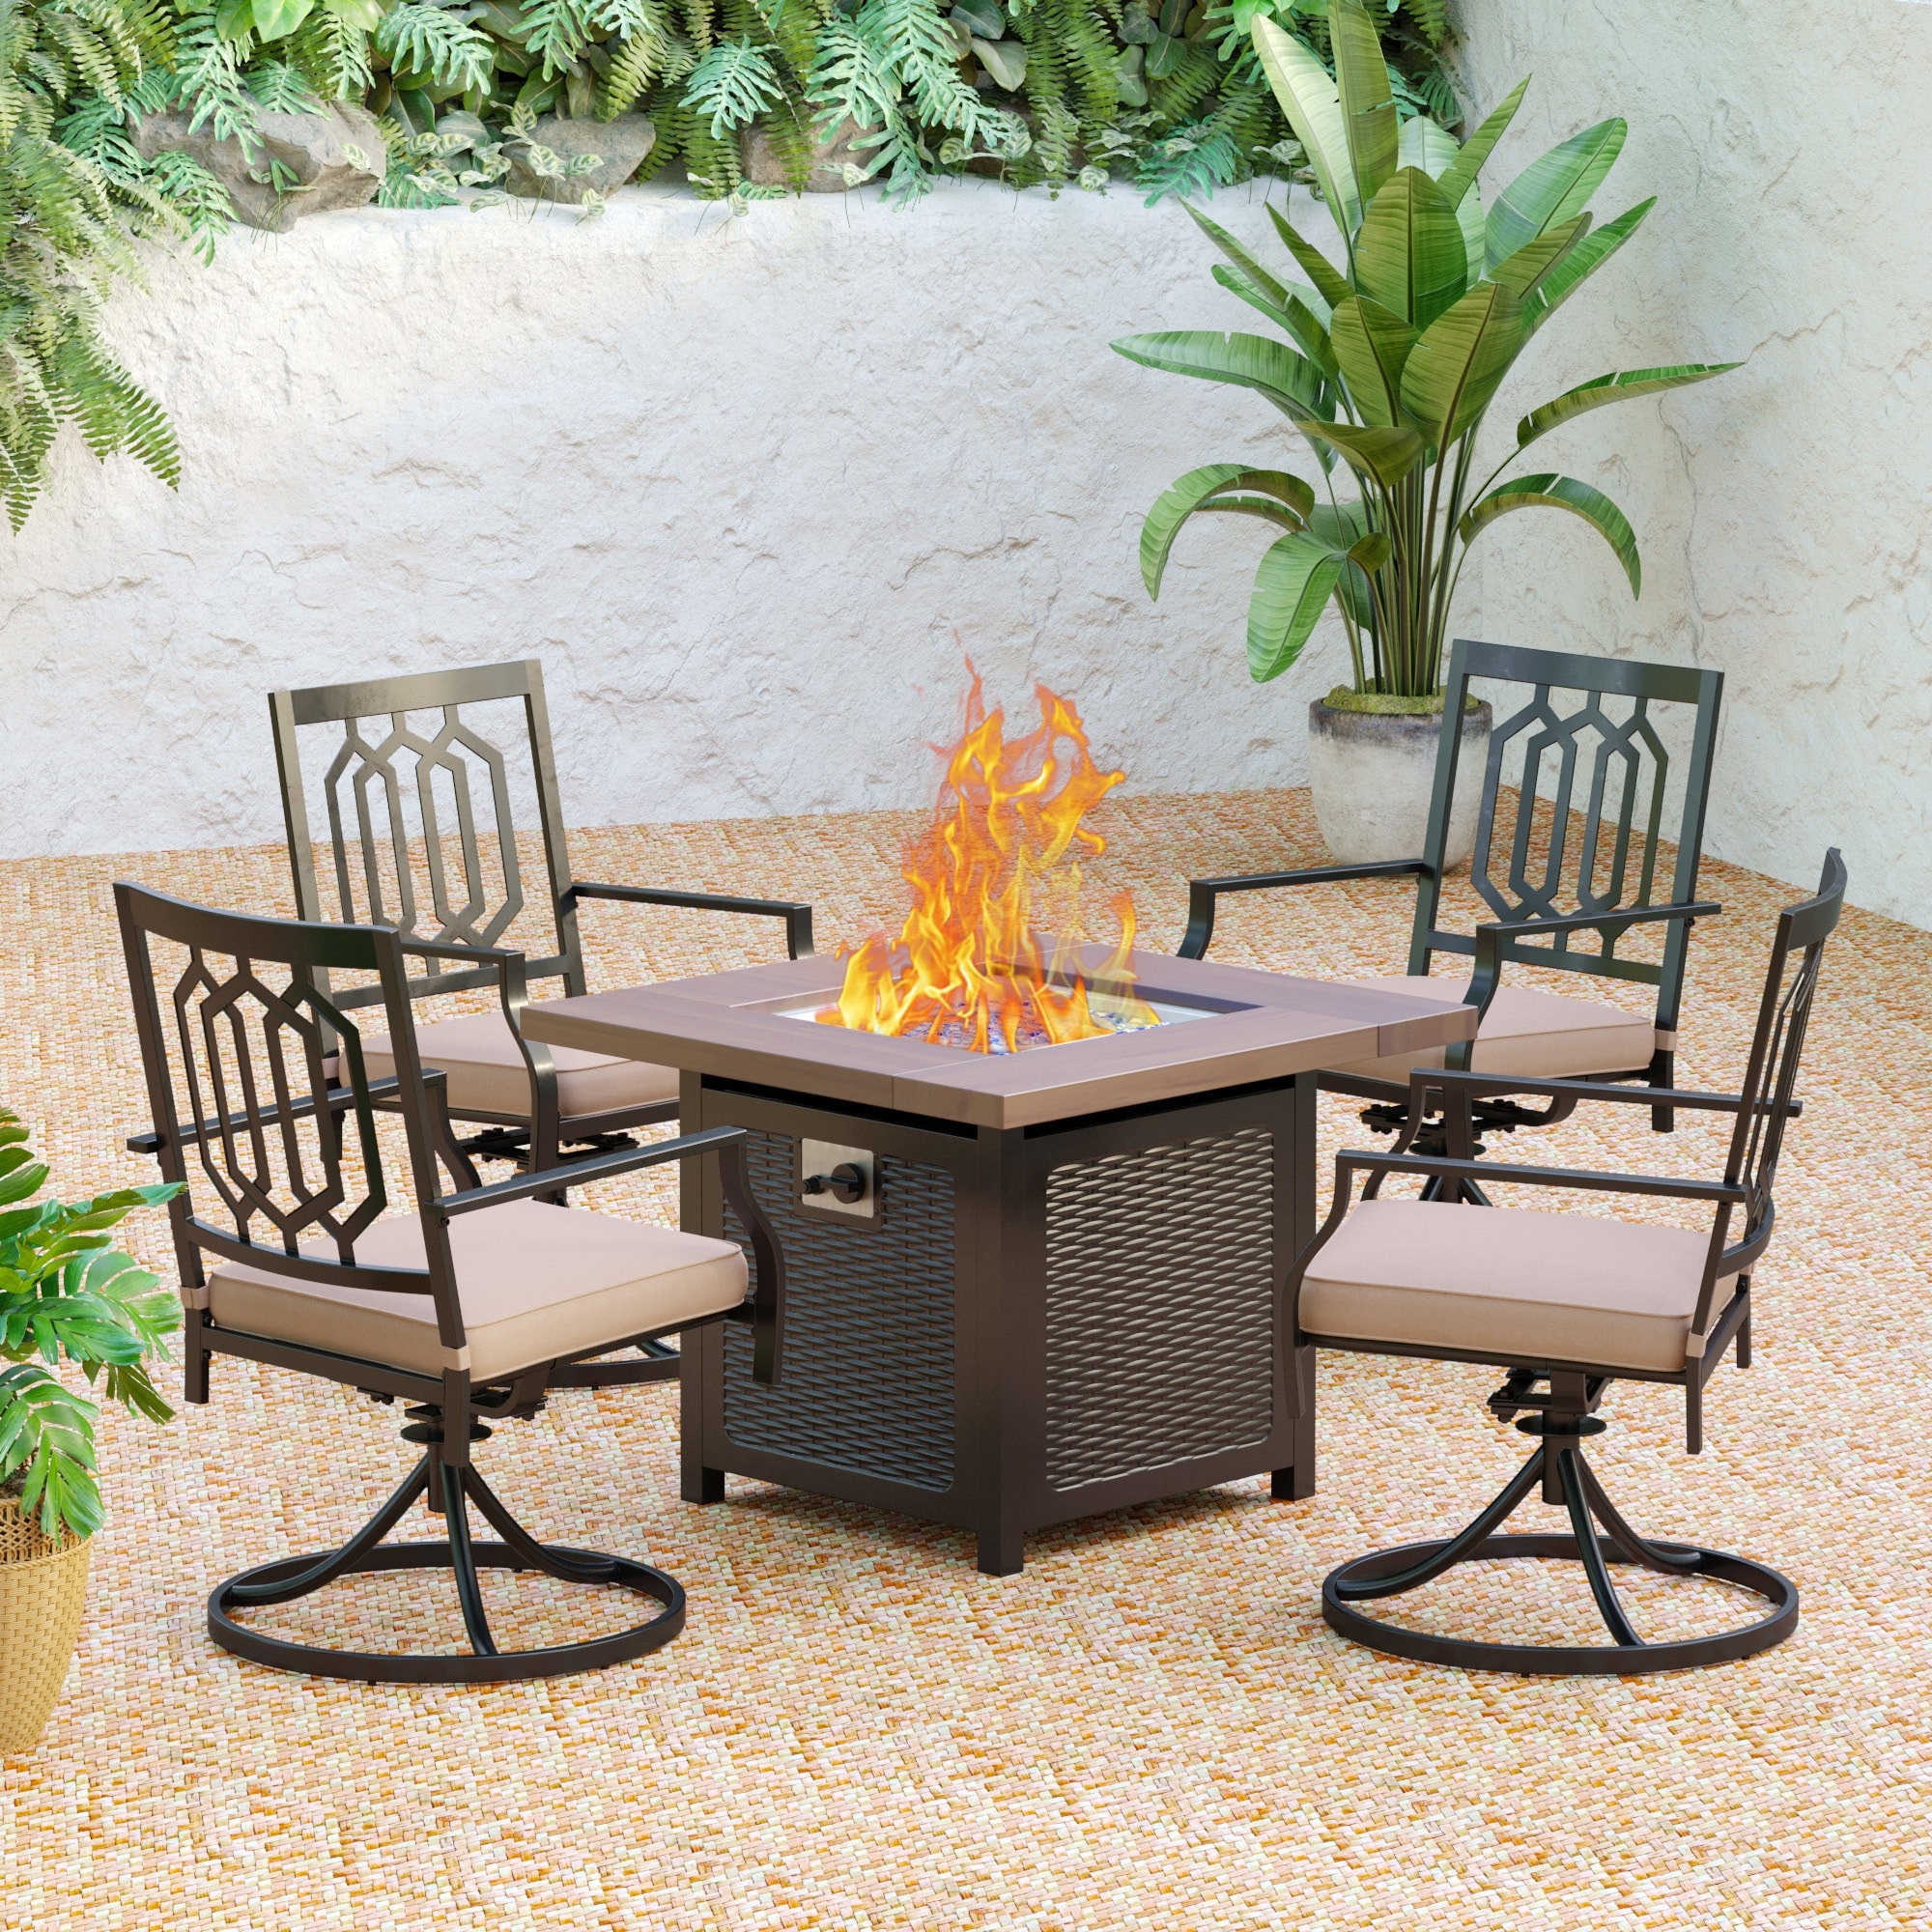 5-piece Gas Fire Pit Table Outdoor Dining Set Steel Swivel Chairs With Cushion and Metal/wood-look Square Gas Fire Pit Table